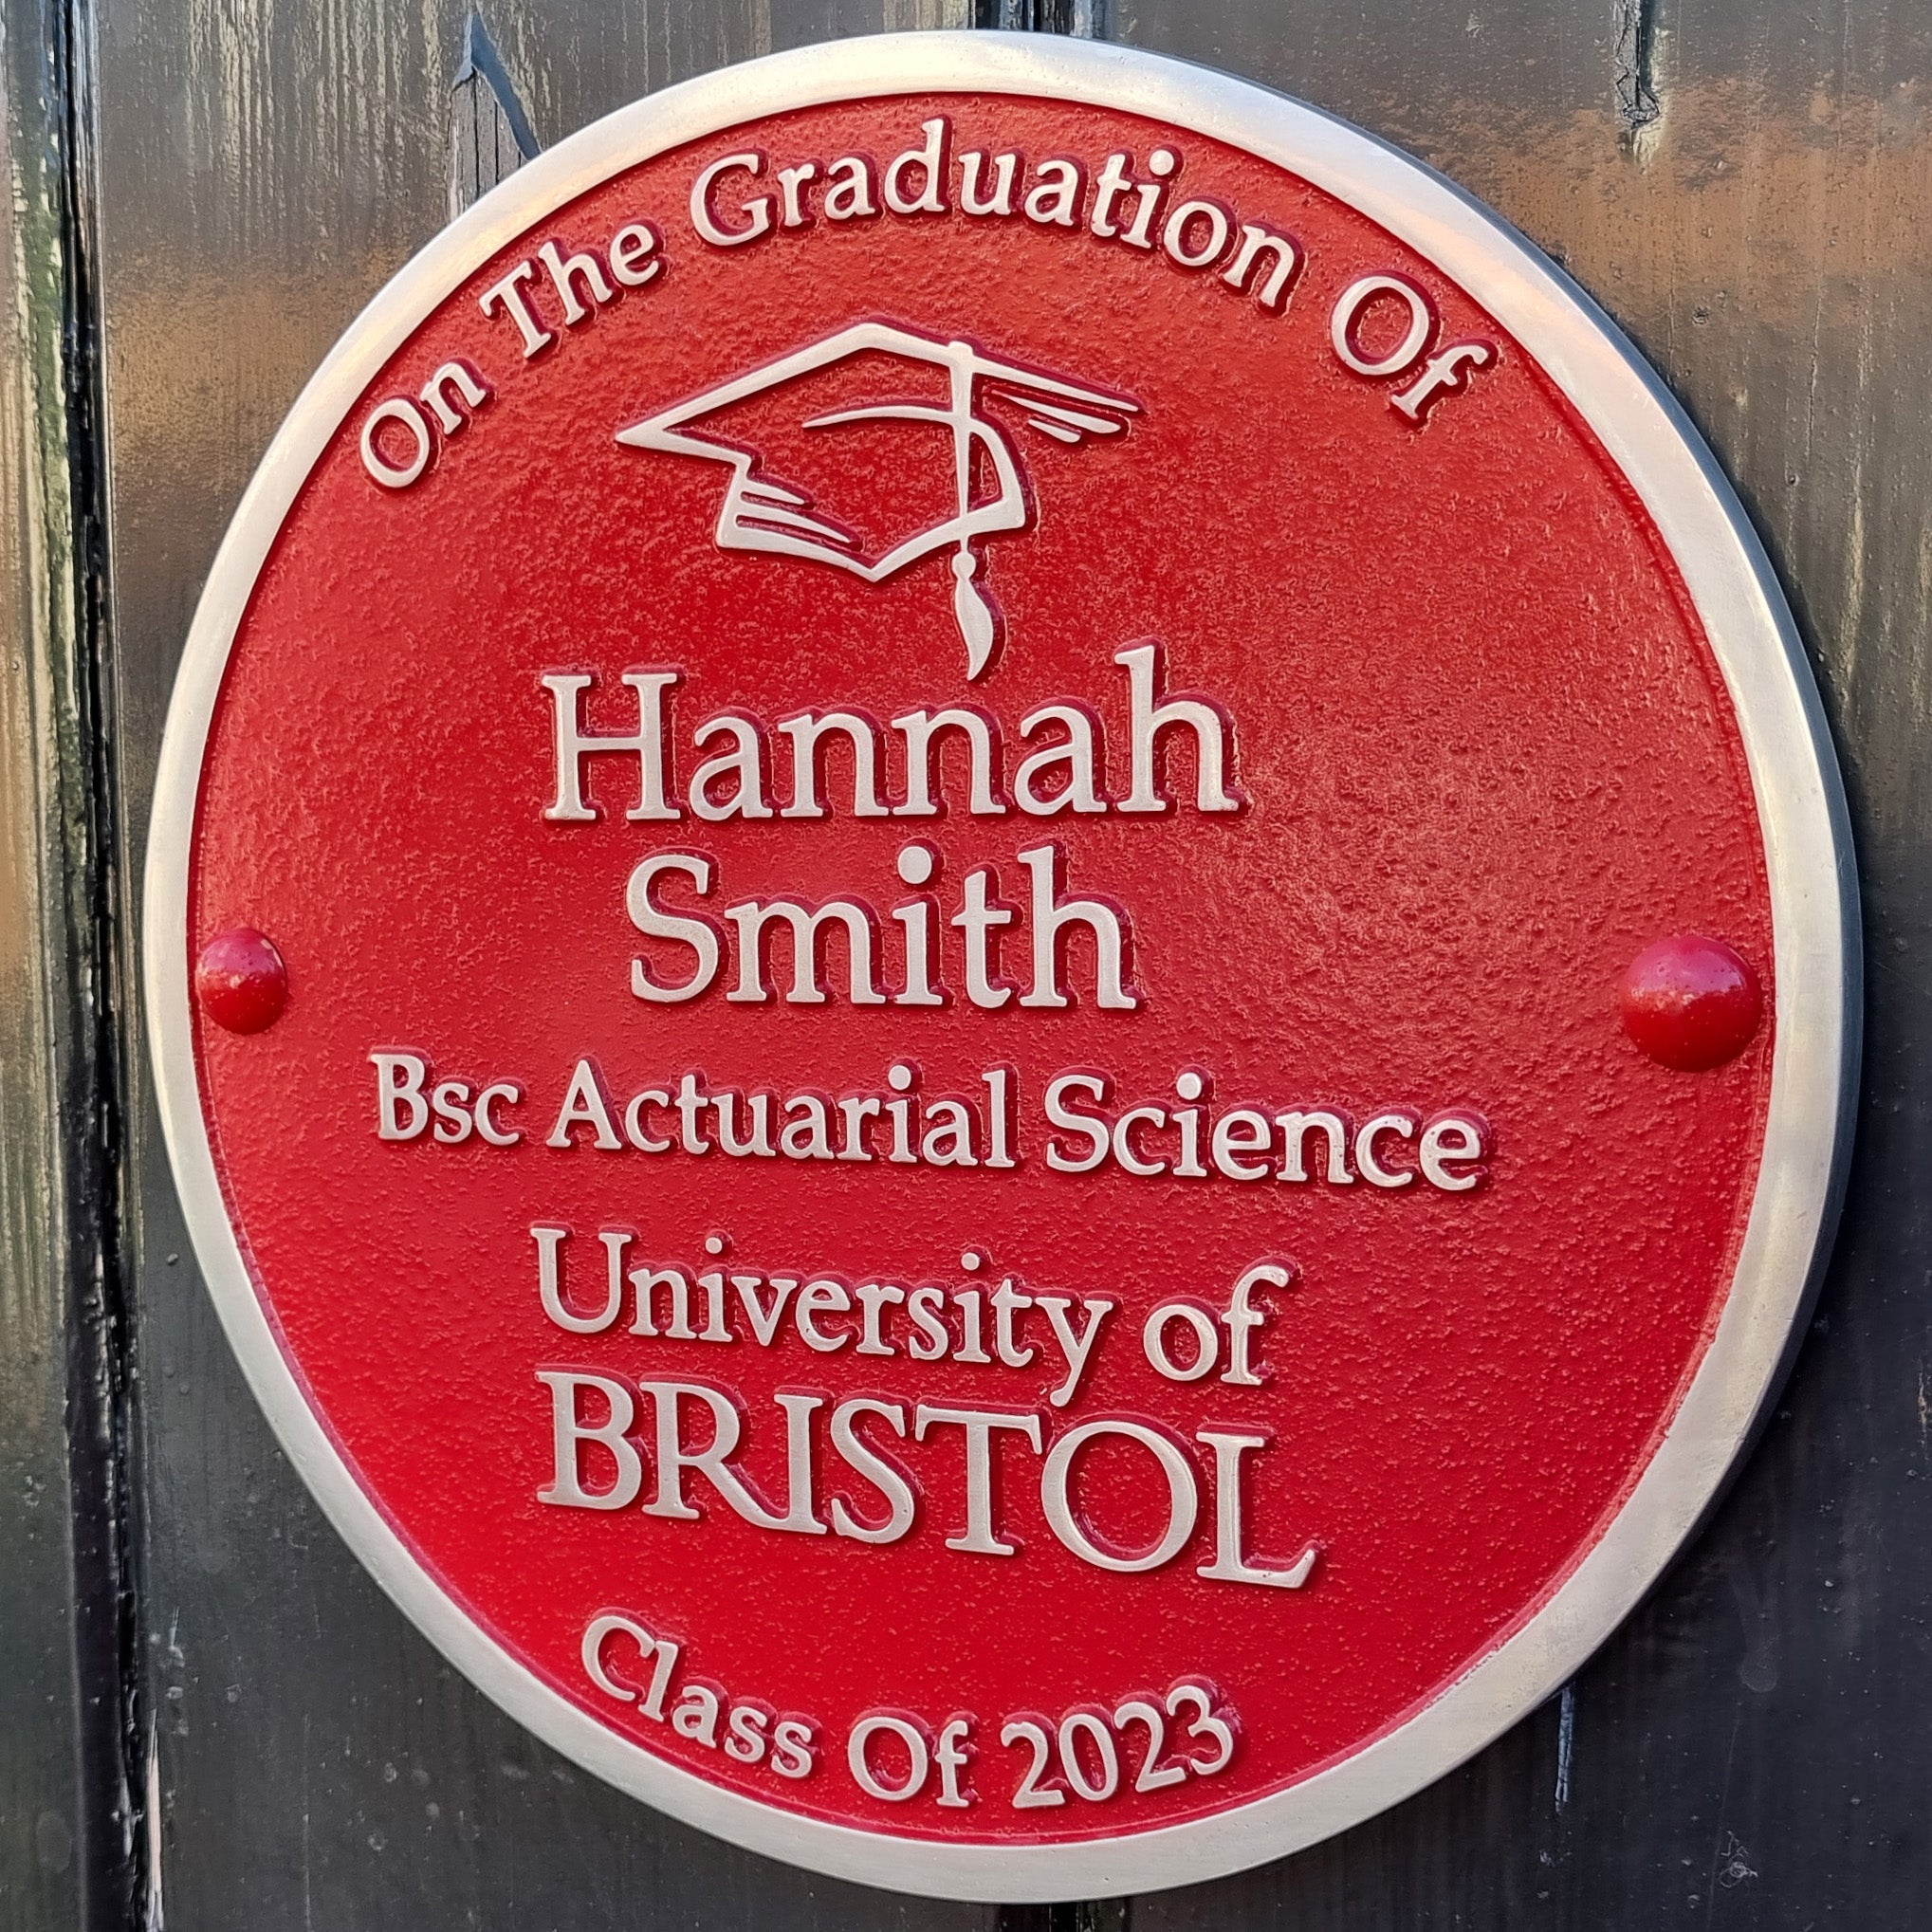 Personalised Blue Plaque 200mm (8